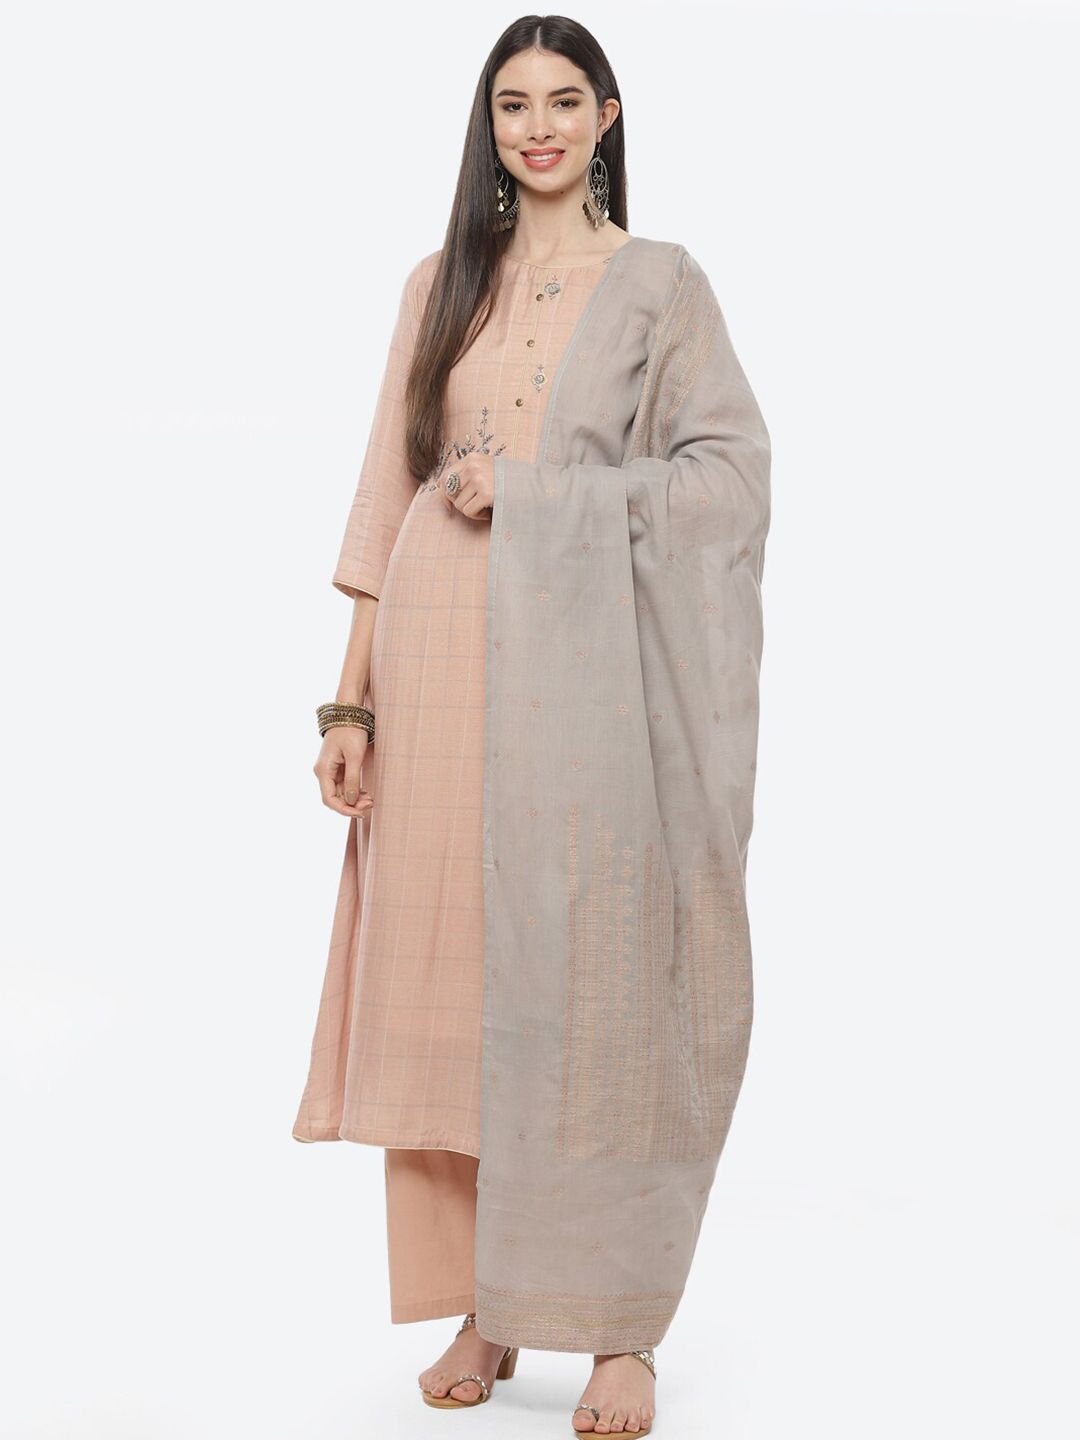 Biba Beige & Grey Embroidered Pure Cotton Unstitched Dress Material Price in India